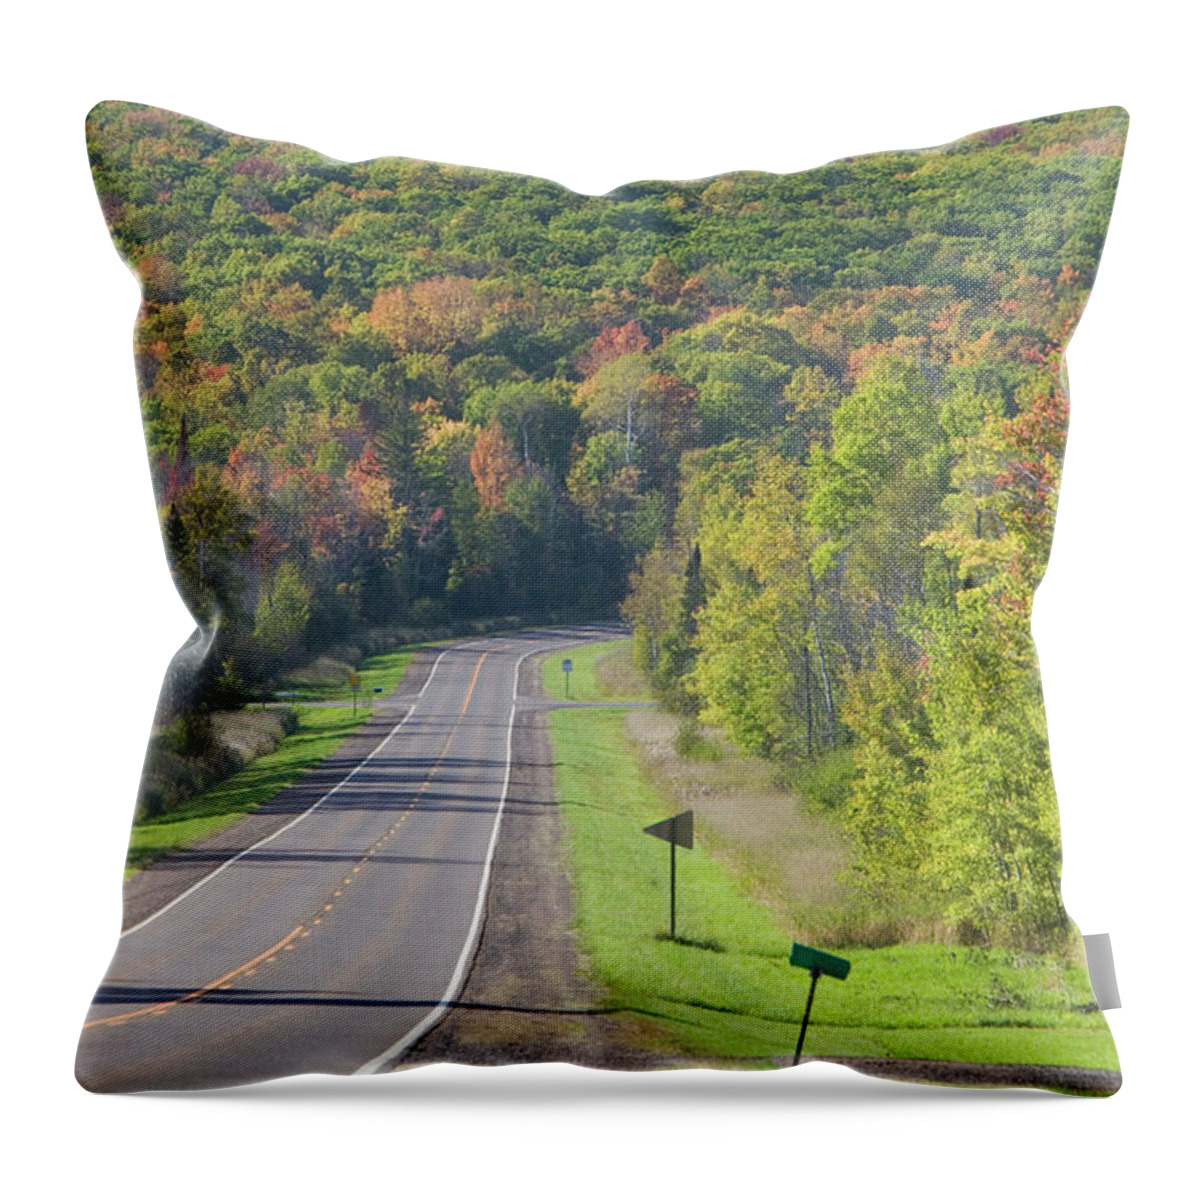 Estock Throw Pillow featuring the digital art Highway With Trees In Autumn by Walter Bibikow